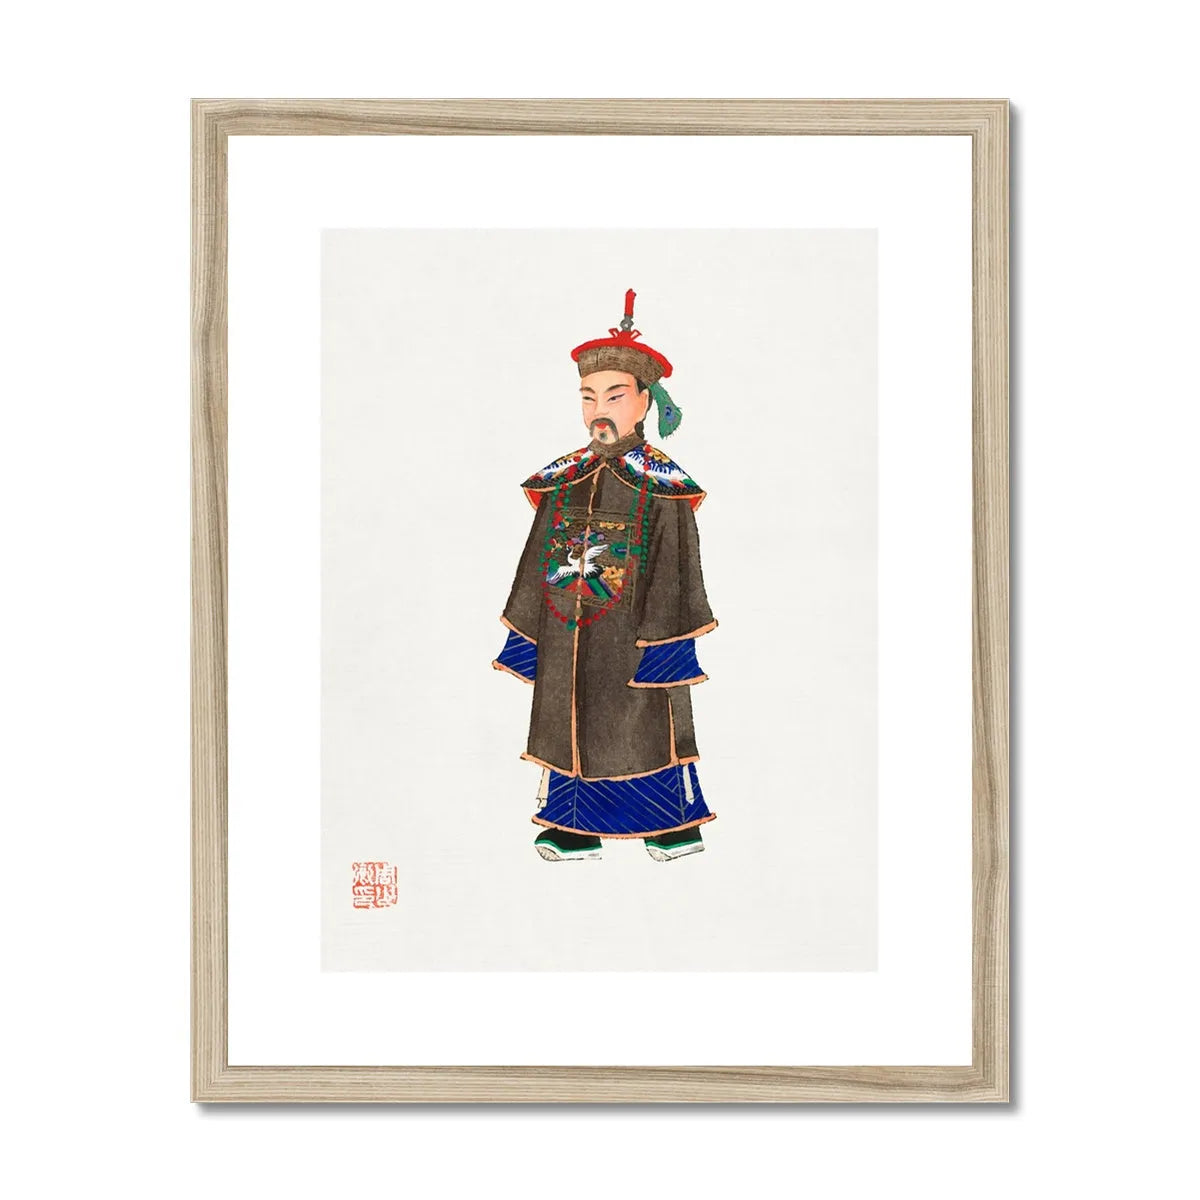 Chinese Nobleman At Court Framed & Mounted Print - 16’x20’ / Natural Frame - Posters Prints & Visual Artwork